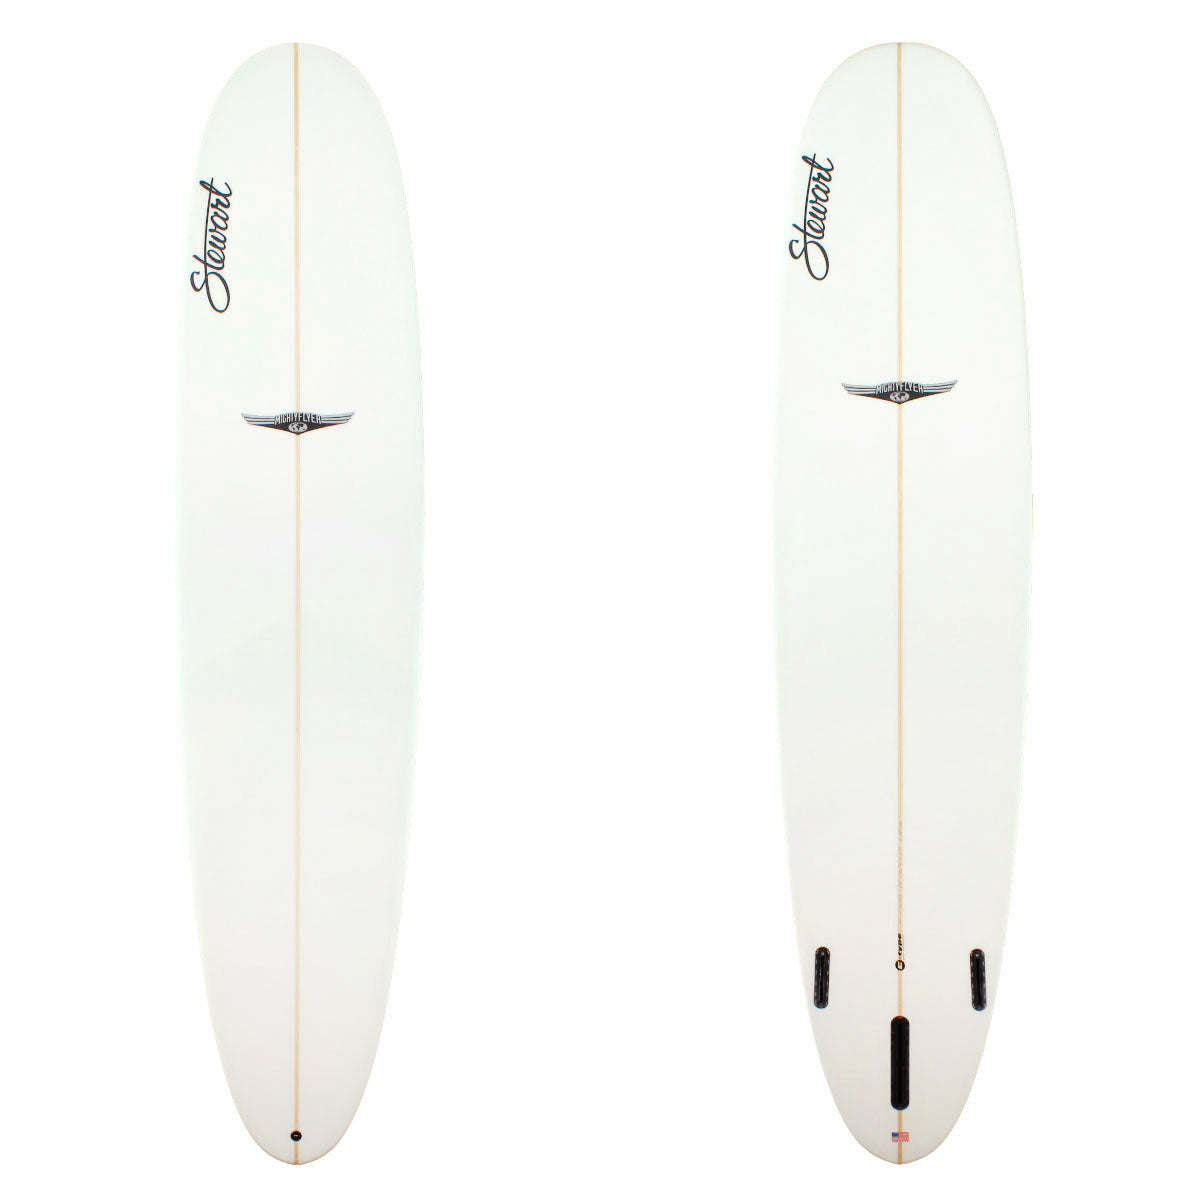 Stewart Surfboards 9'0" Mighty Flyer with clear white top and bottom